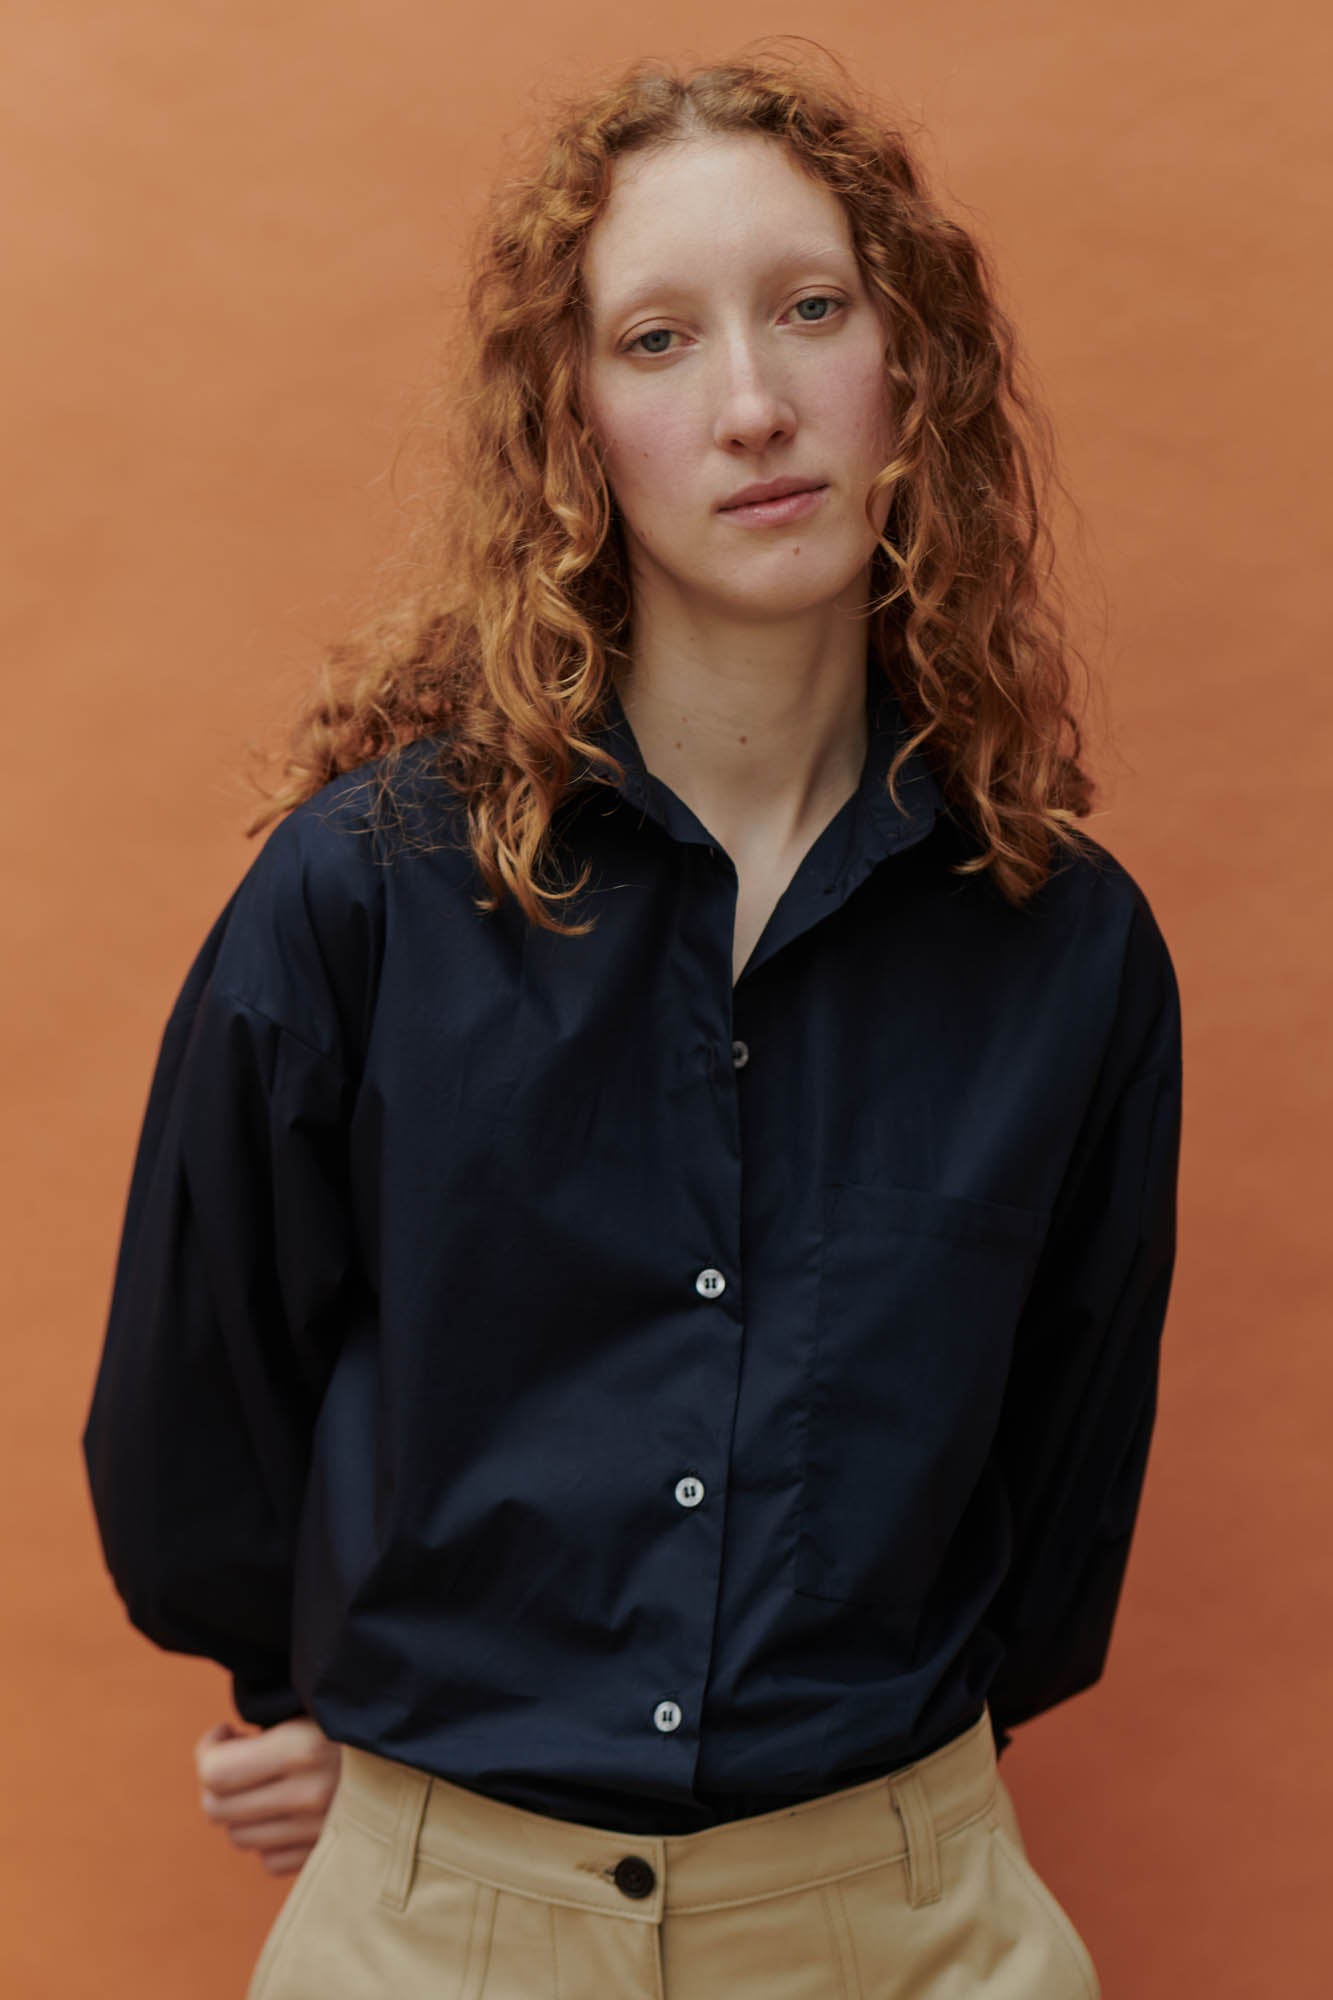 Female wearing the navy long sleeve shirt with the combat pant in front of an orange background.